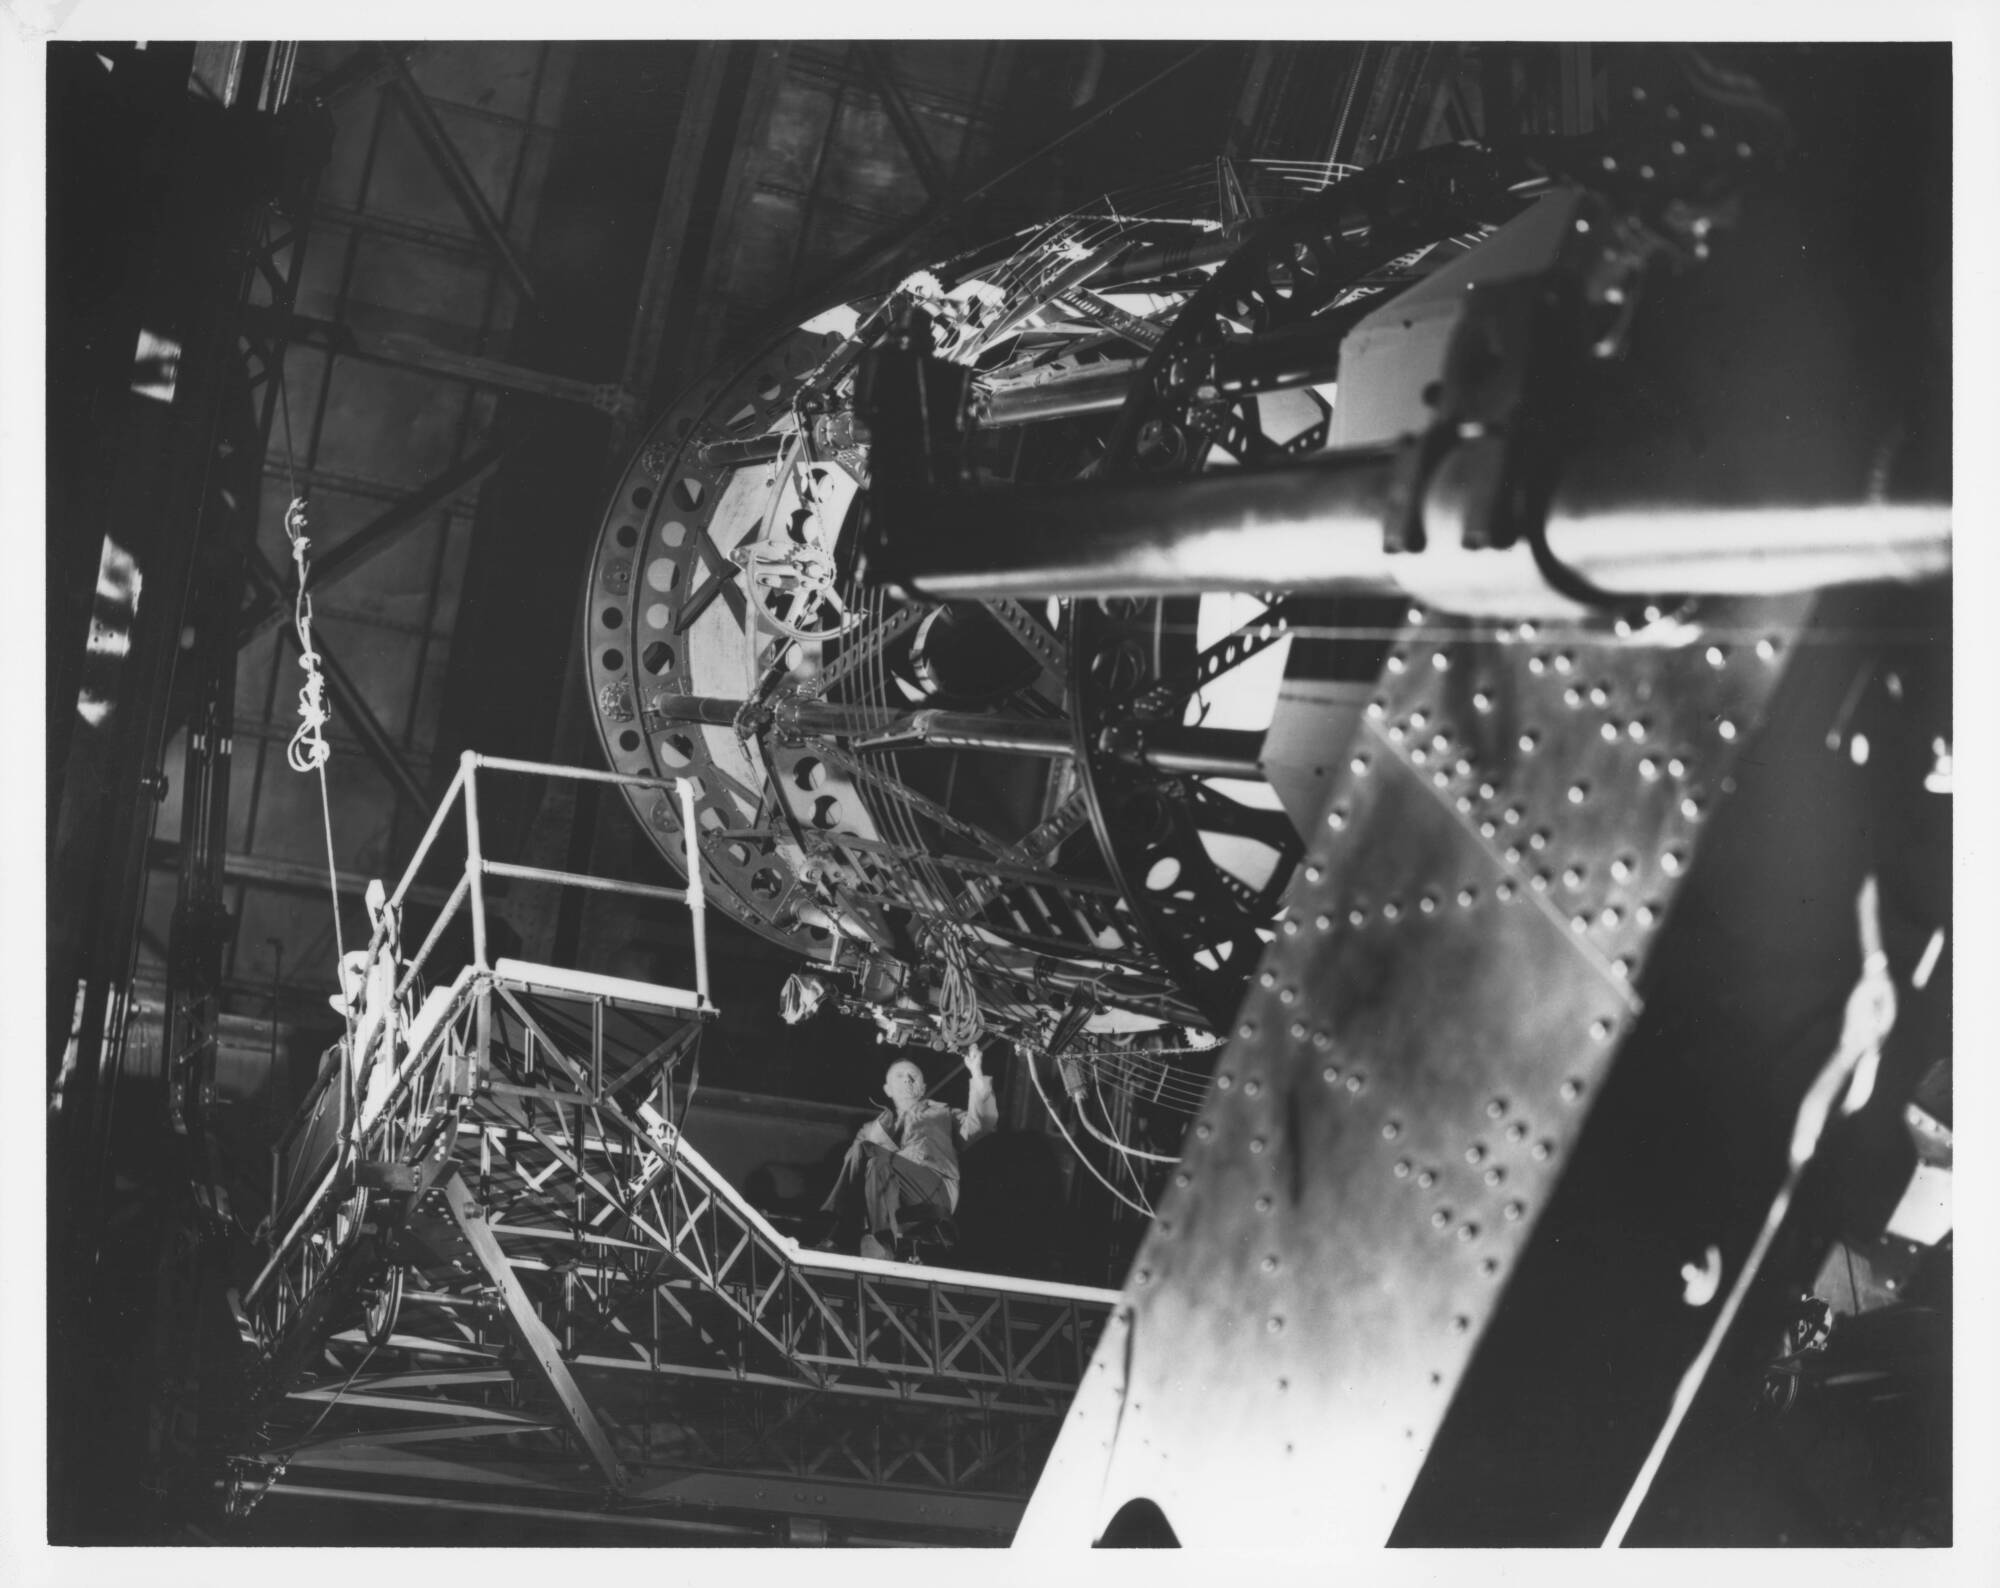 Edwin Hubble sits on the Newtonian platform of the 100-inch reflecting telescope at Mt. Wilson Observatory circa 1940.